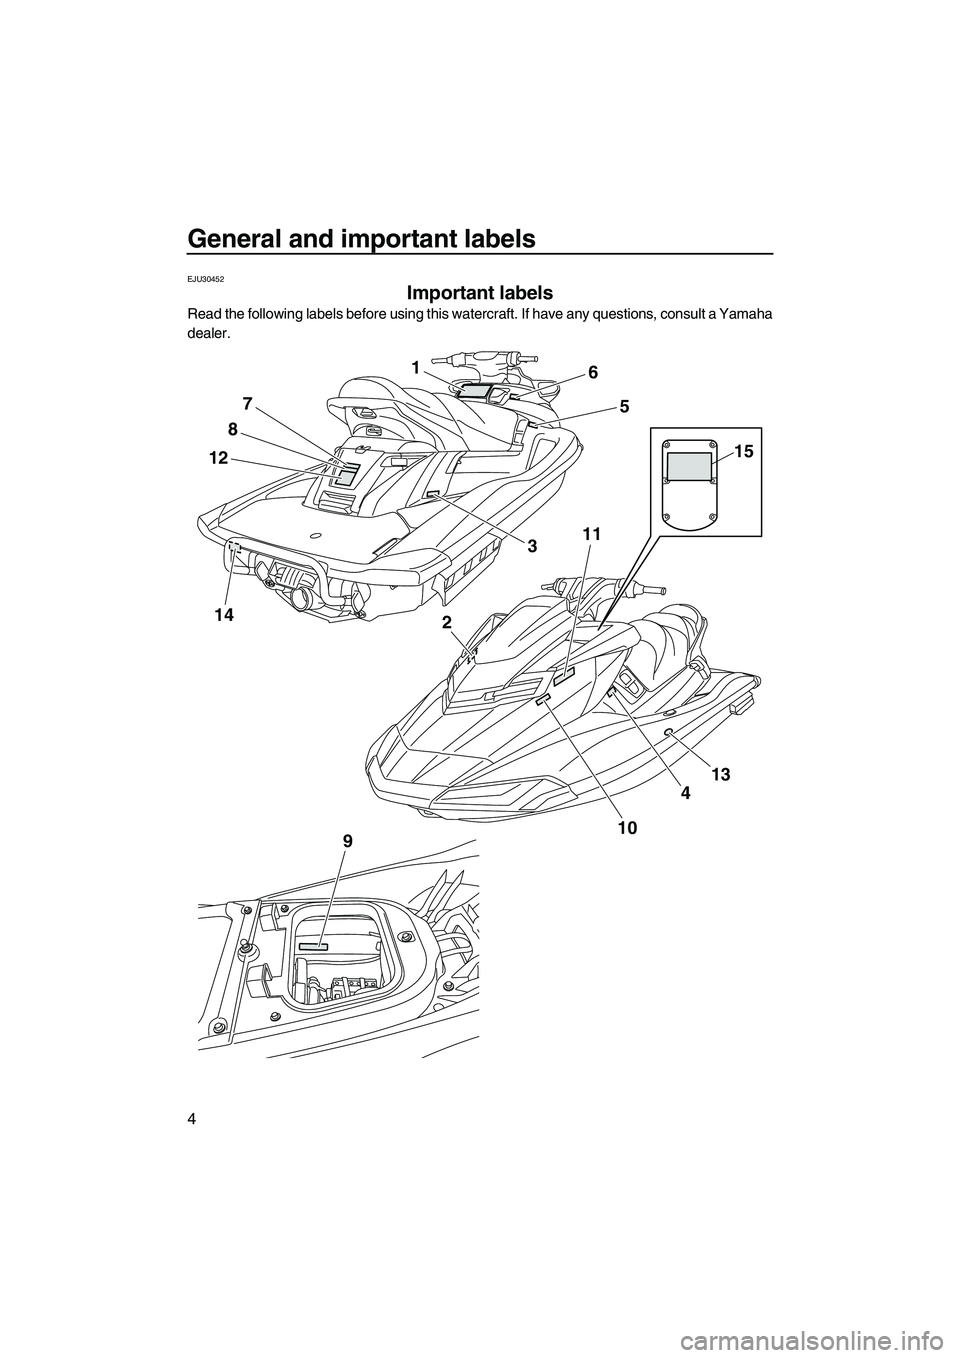 YAMAHA FX HO CRUISER 2013  Owners Manual General and important labels
4
EJU30452
Important labels 
Read the following labels before using this watercraft. If have any questions, consult a Yamaha
dealer.
14
1
12
8
7
11
2
9
4
13
10
6
5
3
15
UF